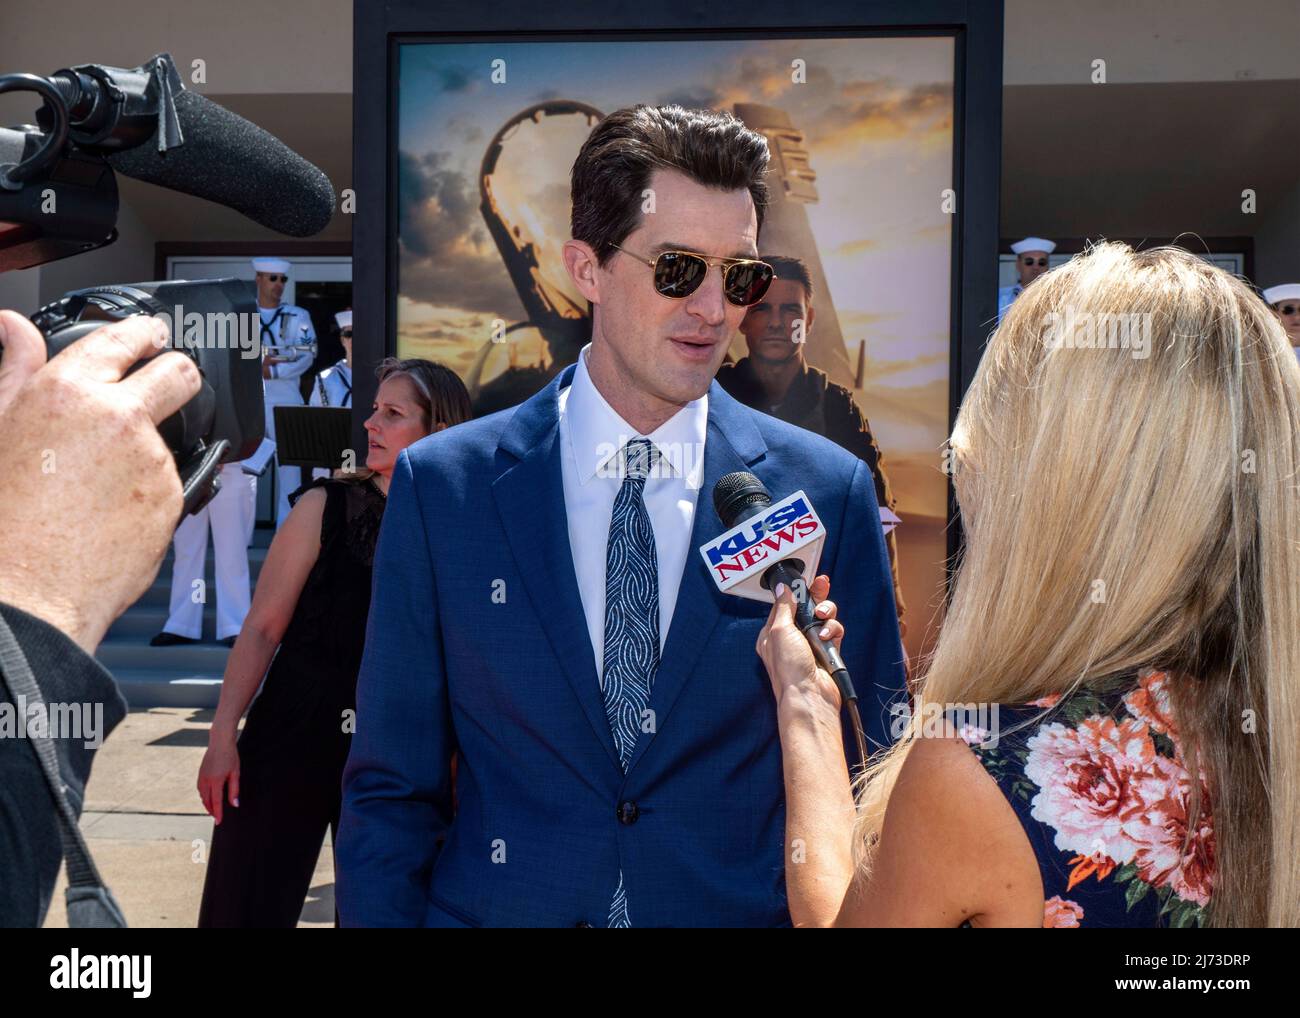 San Diego, United States. 04 May, 2022. Movie director Joe Kosinski, center, is interviewed on the red carpet during the advance movie premiere of Top Gun: Maverick, at Naval Air Station North Island, May 4, 2022 in San Diego, California, Top Gun: Maverick, is the sequel to the 1986 blockbuster, Top Gun and will be released worldwide on May 27.  Credit: MC2 Keenan Daniels/US Navy/Alamy Live News Stock Photo